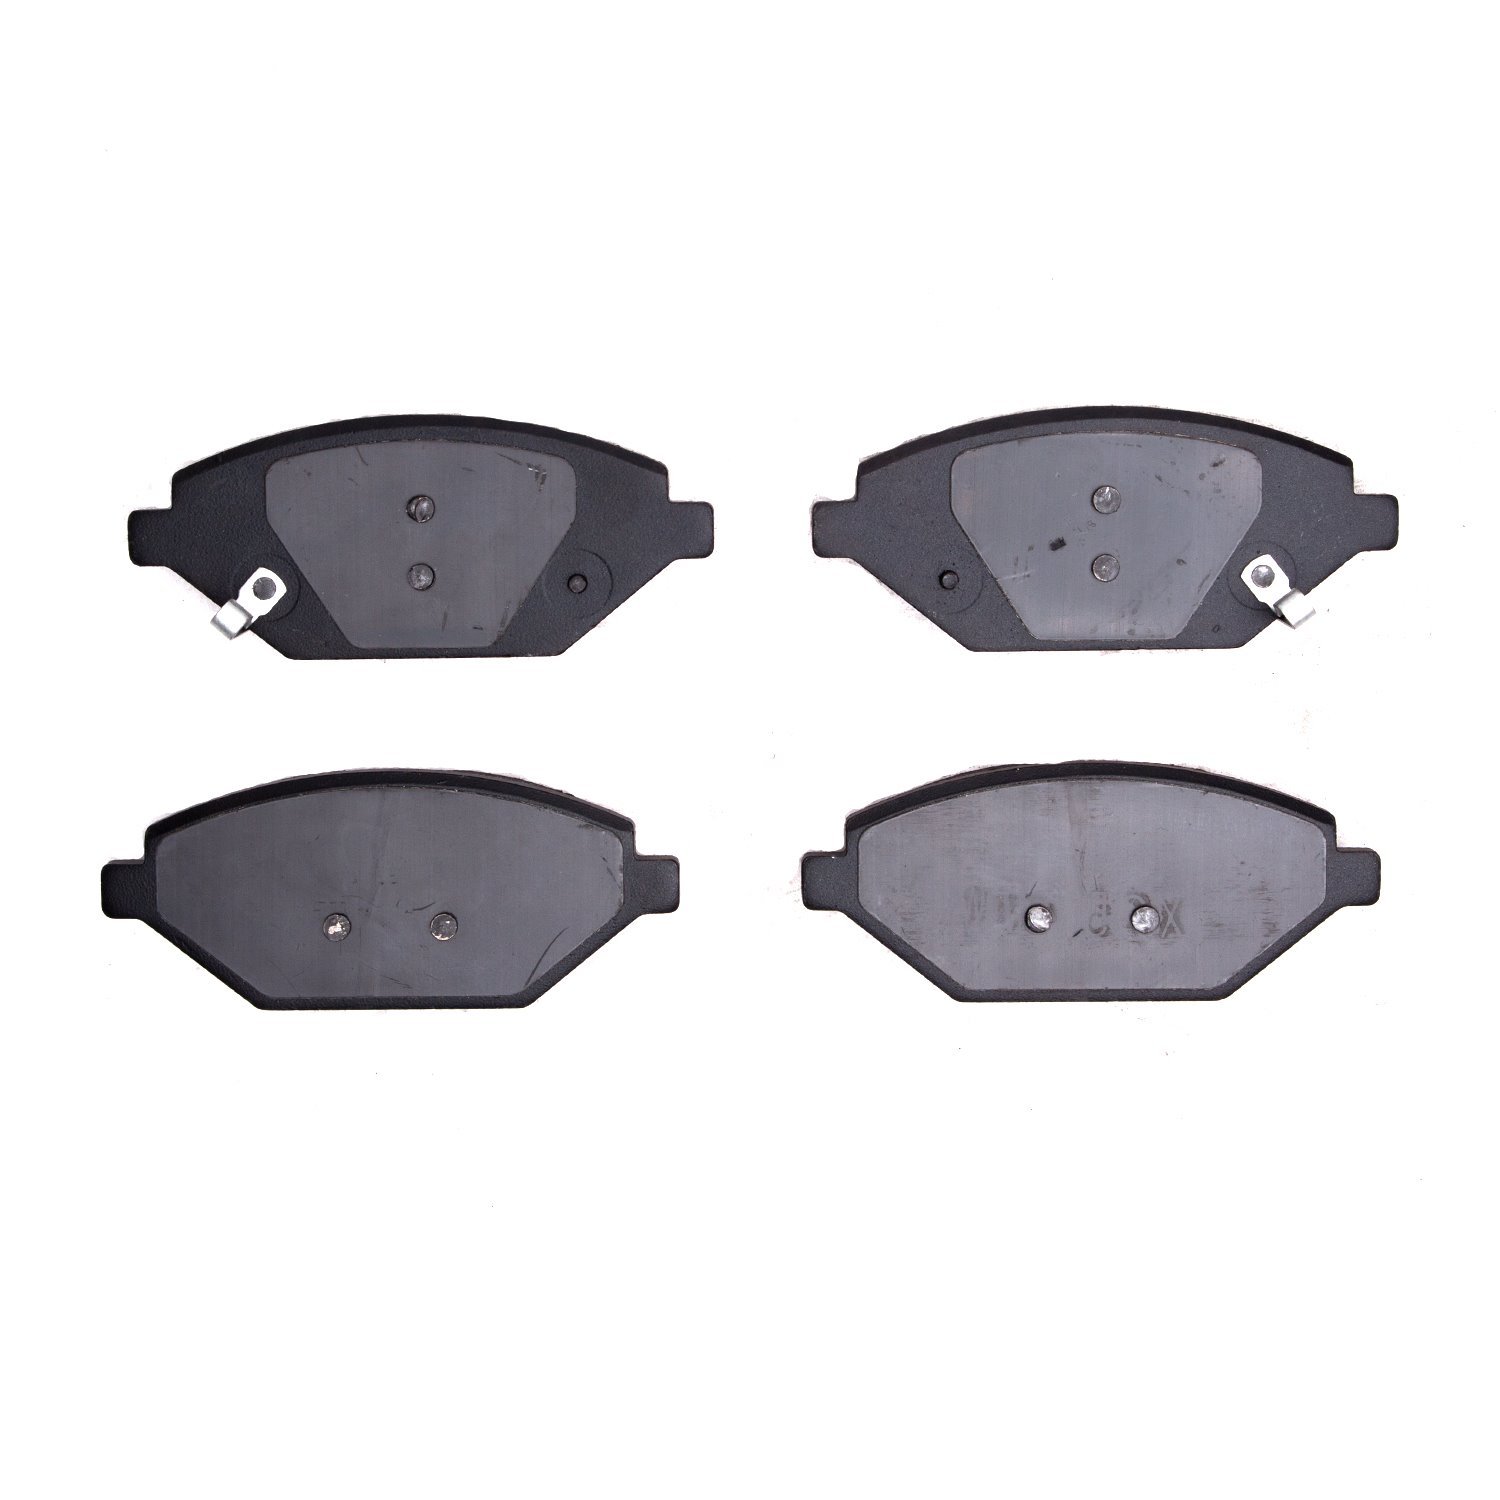 1310-1864-00 3000-Series Ceramic Brake Pads, Fits Select GM, Position: Front